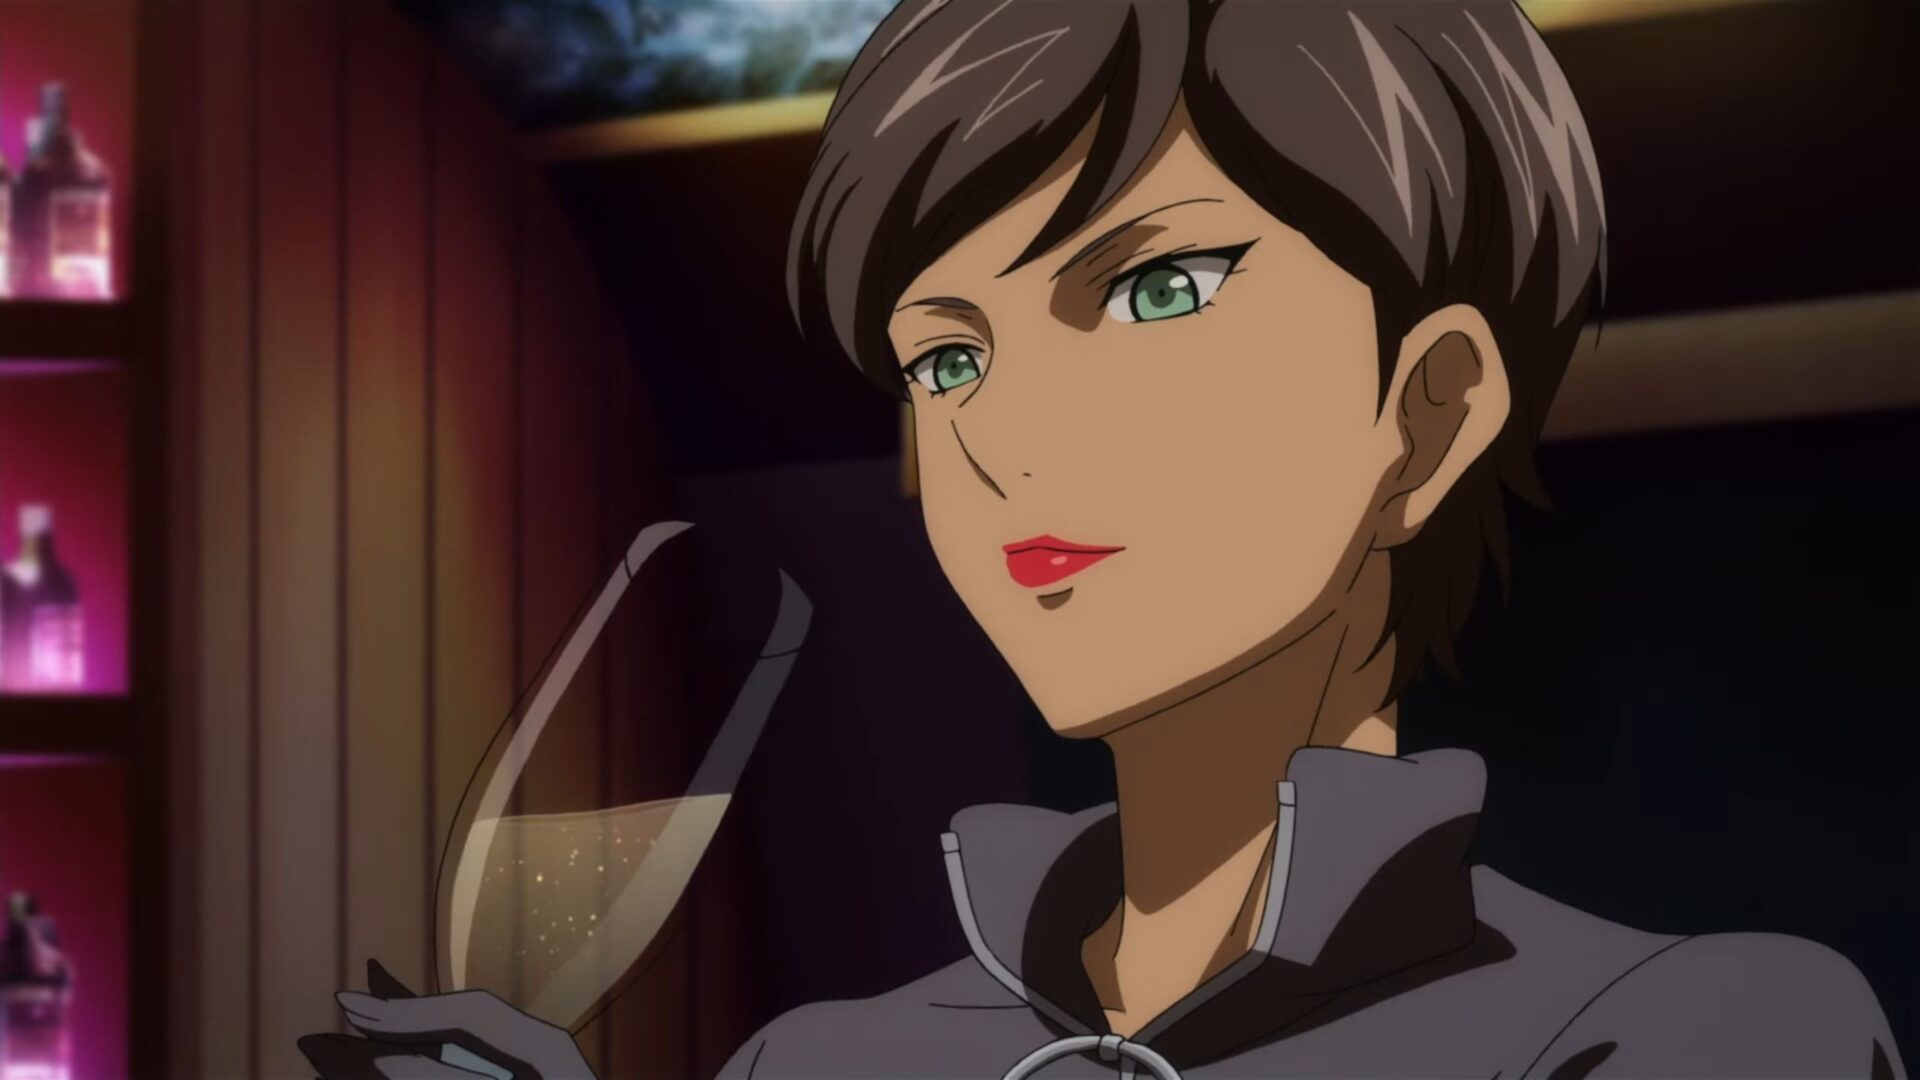 Catwoman: Hunted Animated Film Gets New Trailer; Coming Early Next Year